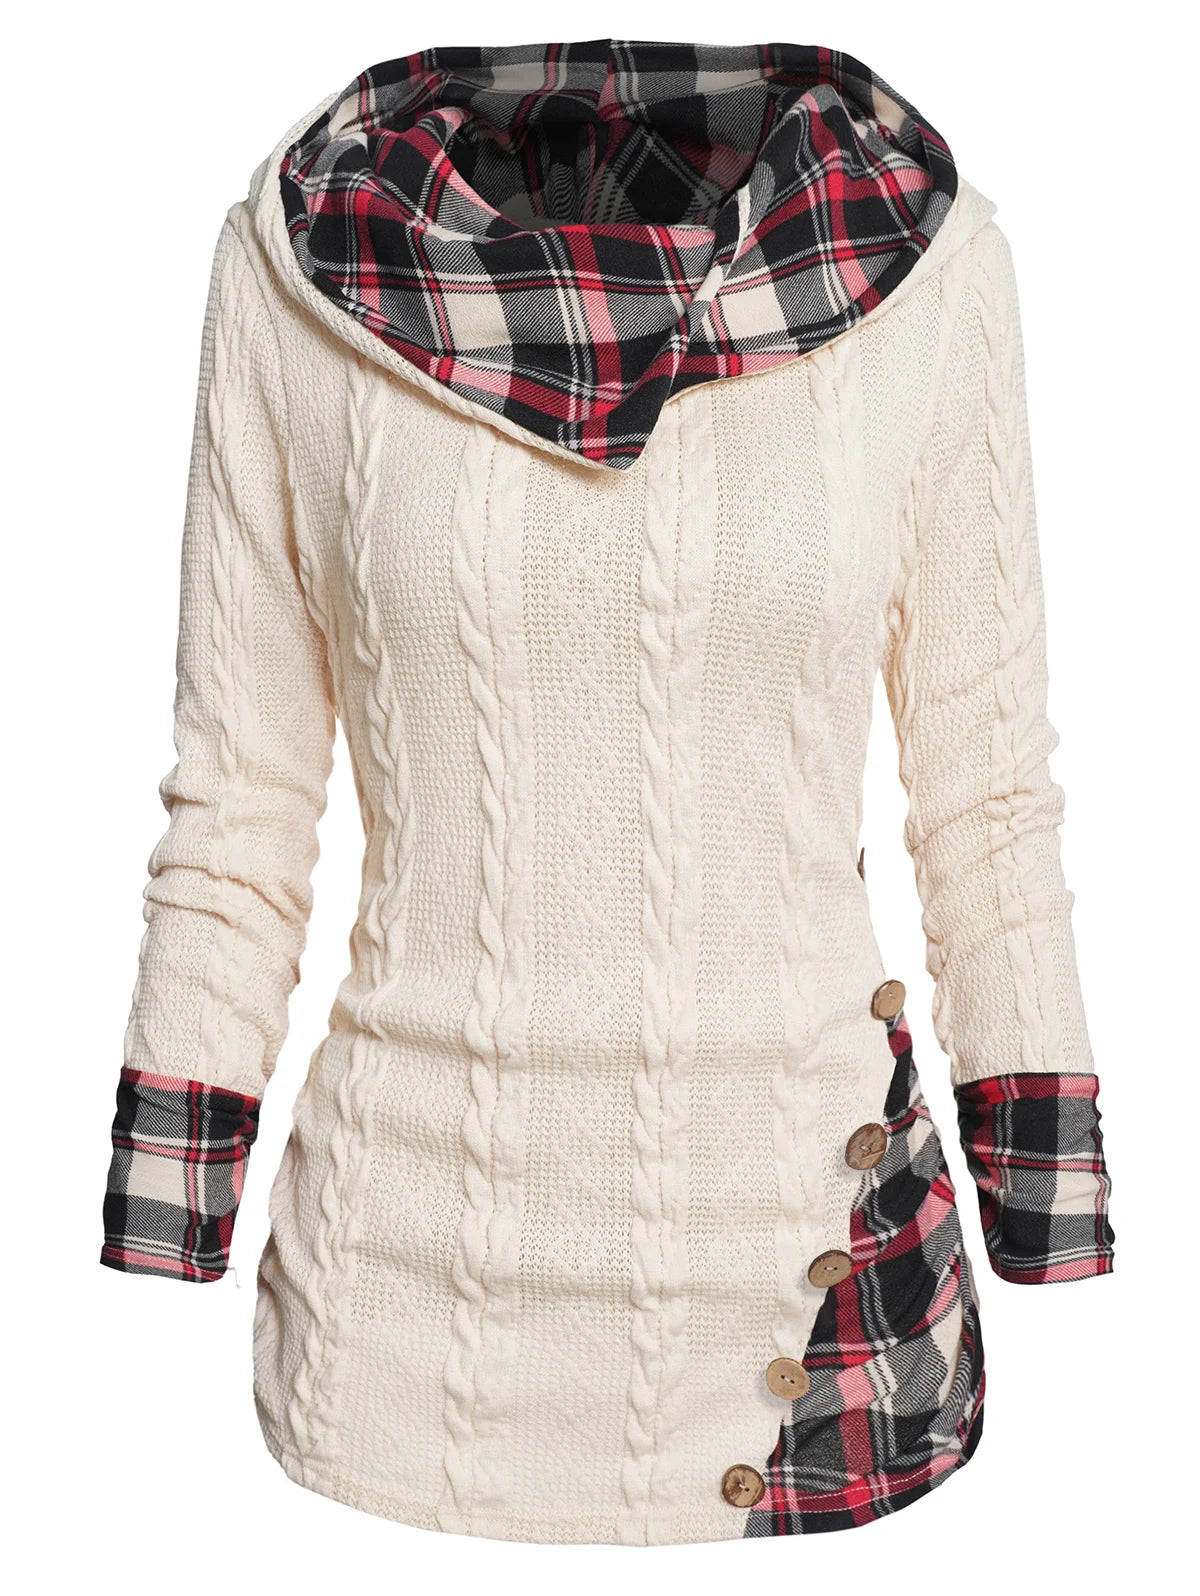 Plaid Textured Knit Hooded Top